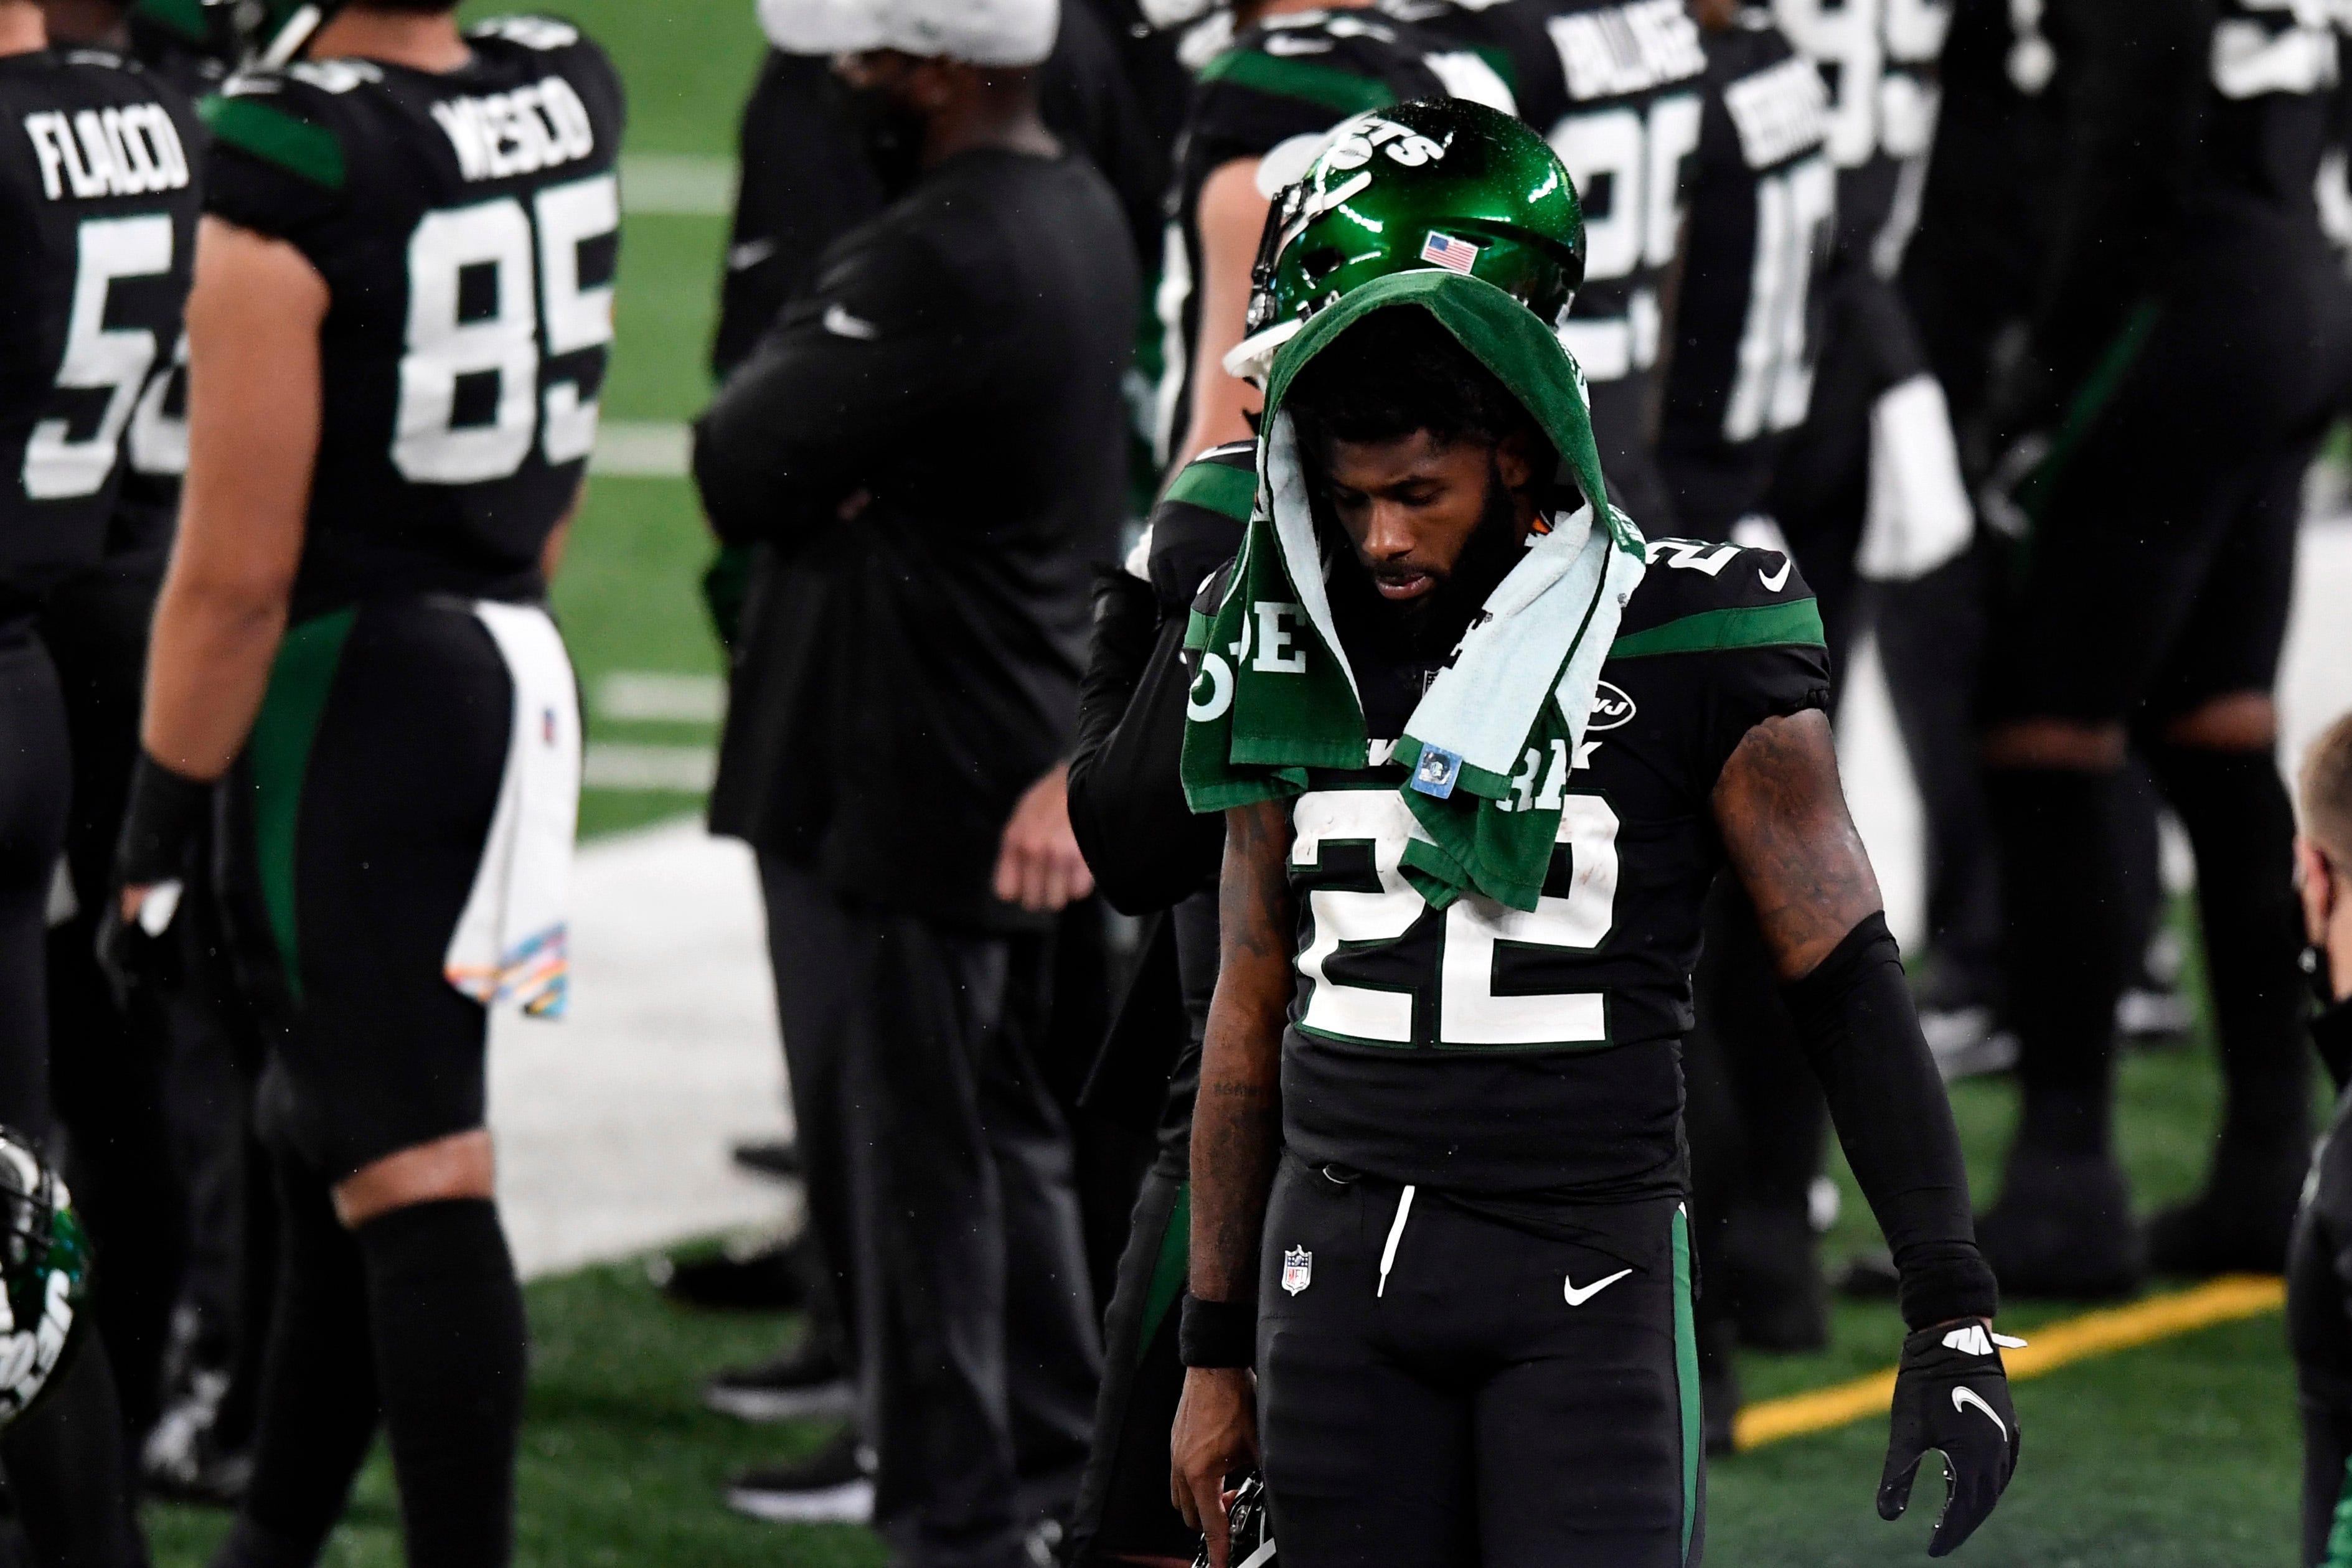 New York Jets running back La'Mical Perine (22) on the sideline as the game ends. The Jets lose to the Broncos, 37-28, at MetLife Stadium on Thursday, Oct. 1, 2020, in East Rutherford. Nfl Jets Broncos / Danielle Parhizkaran/NorthJersey.com via Imagn Content Services, LLC